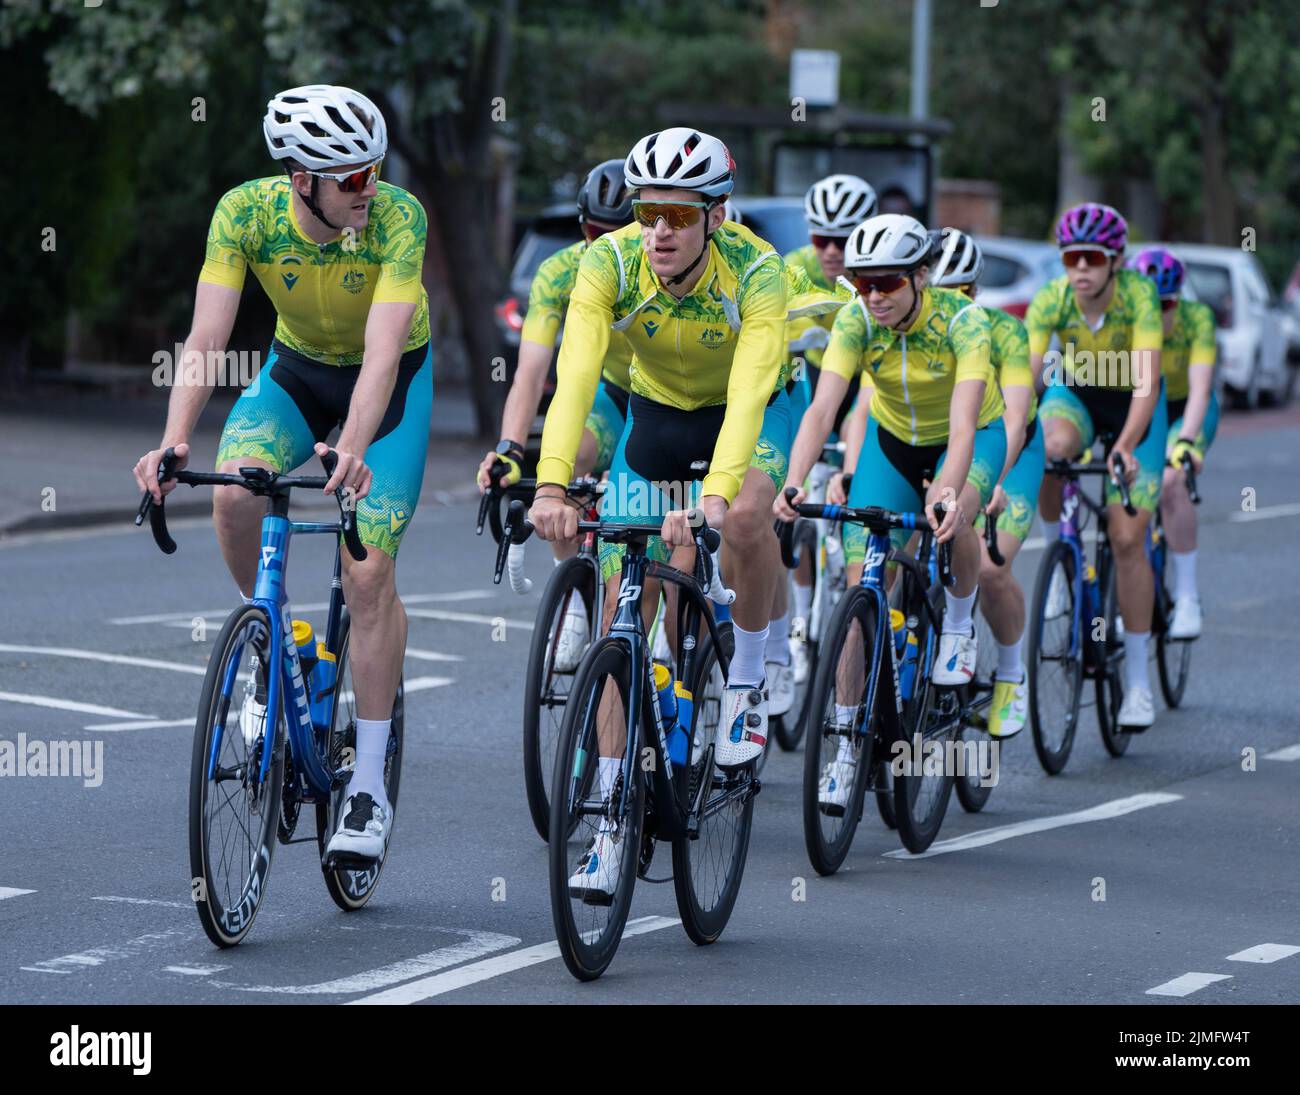 Commonwealth Games Cycling Road Race practice Stock Photo